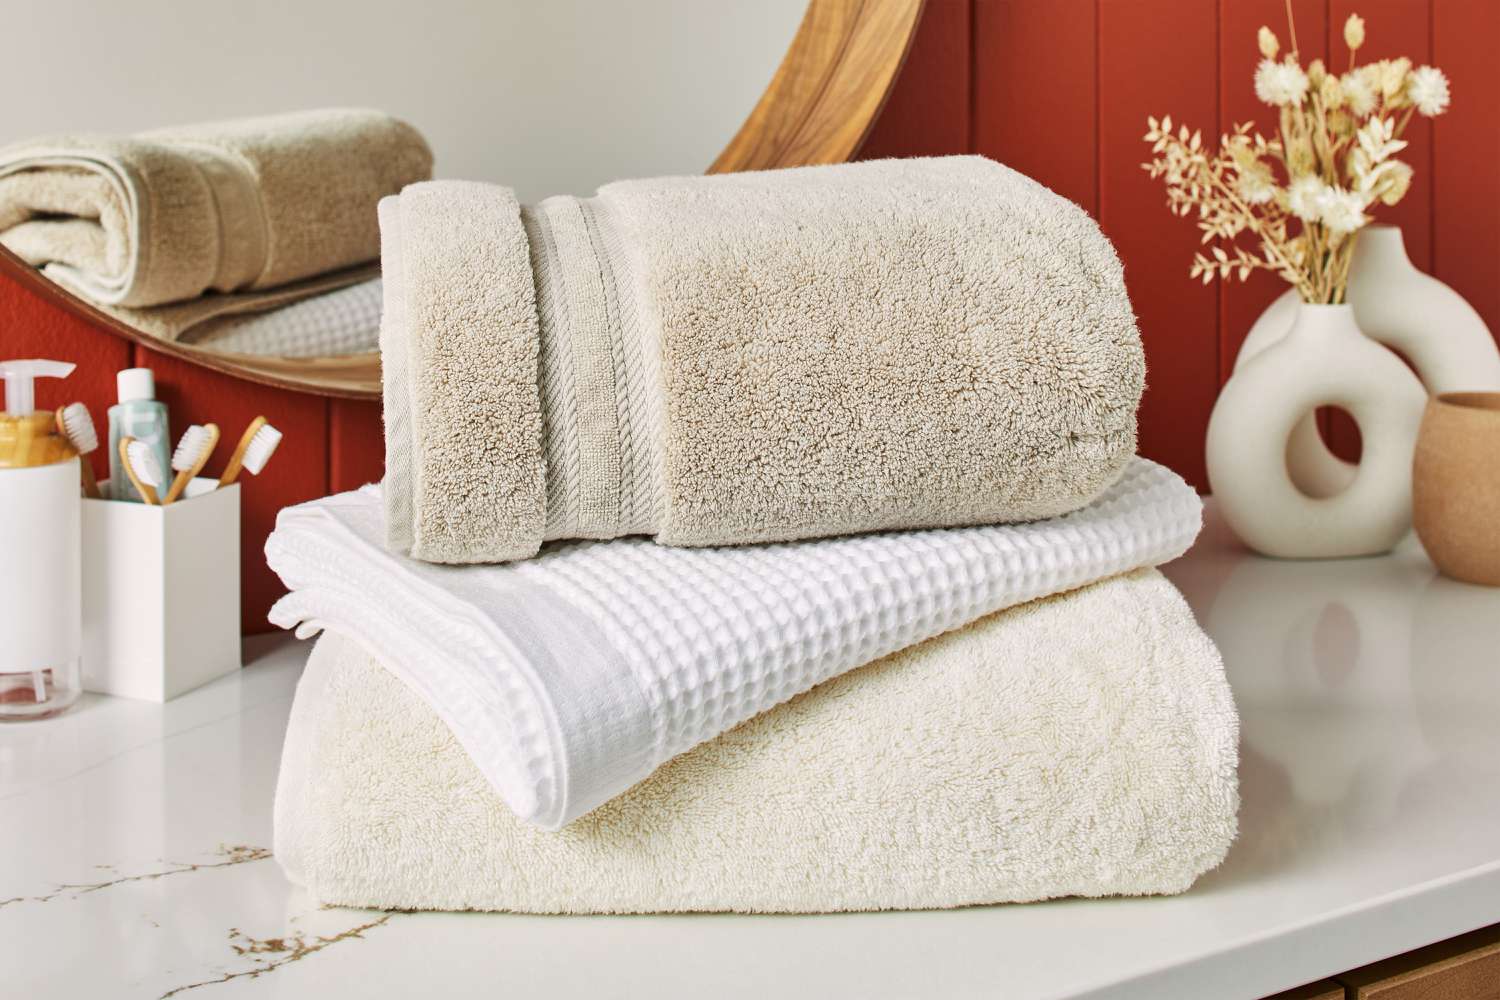 Choosing the Right Sanitation Towel: A Comprehensive Review